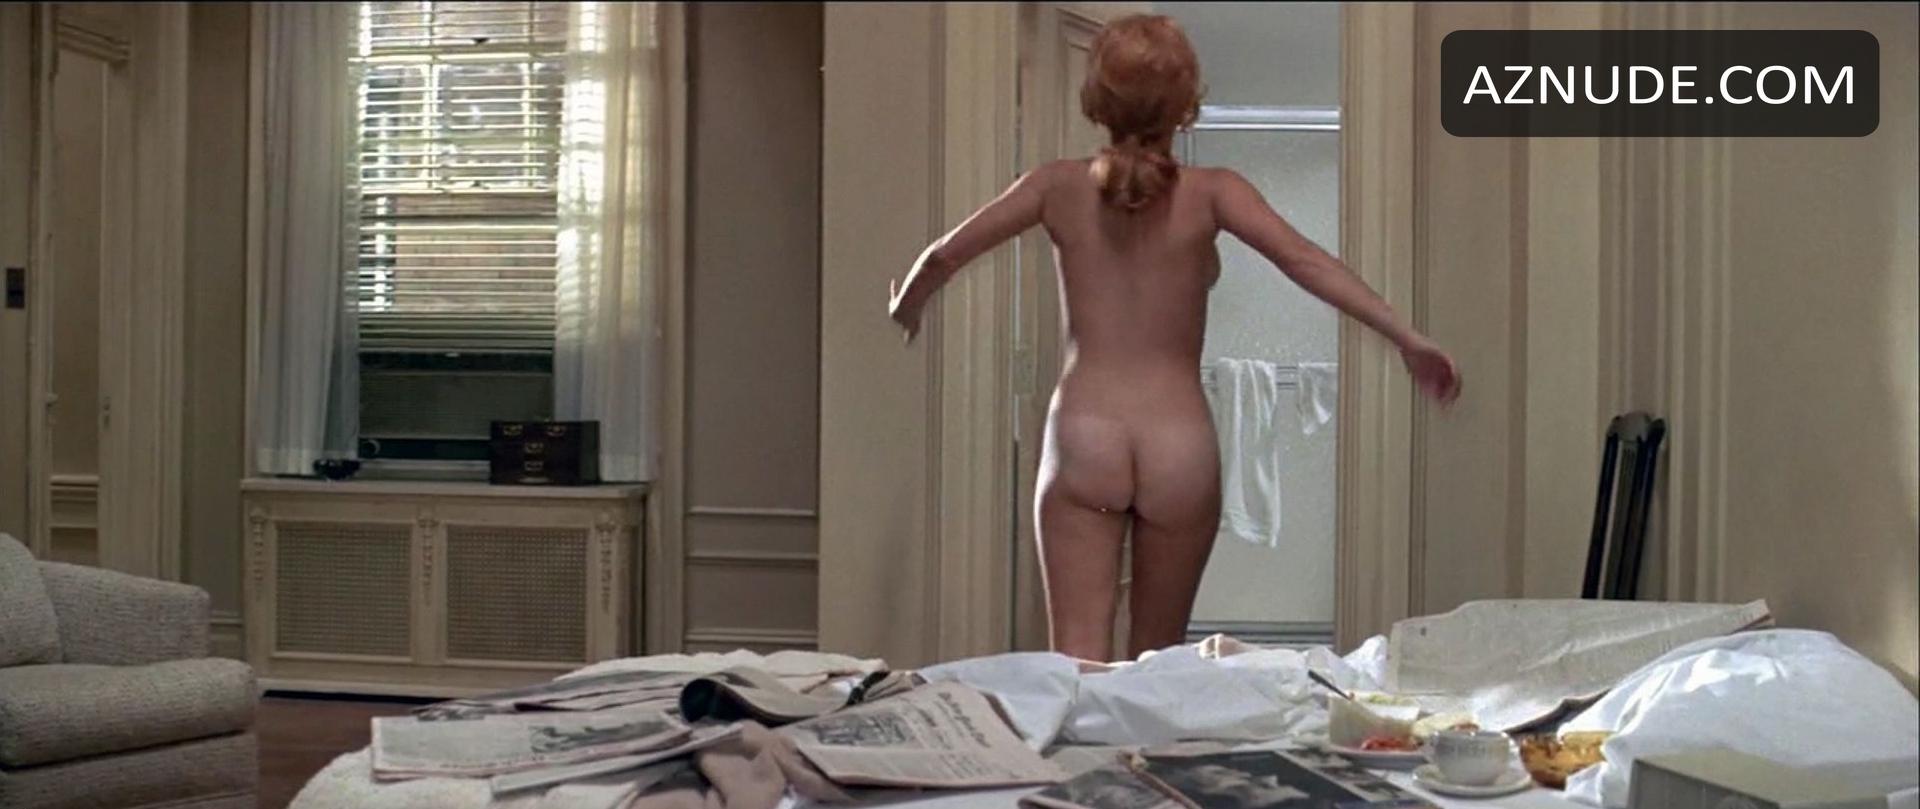 Ann-margret carnal knowledge nude